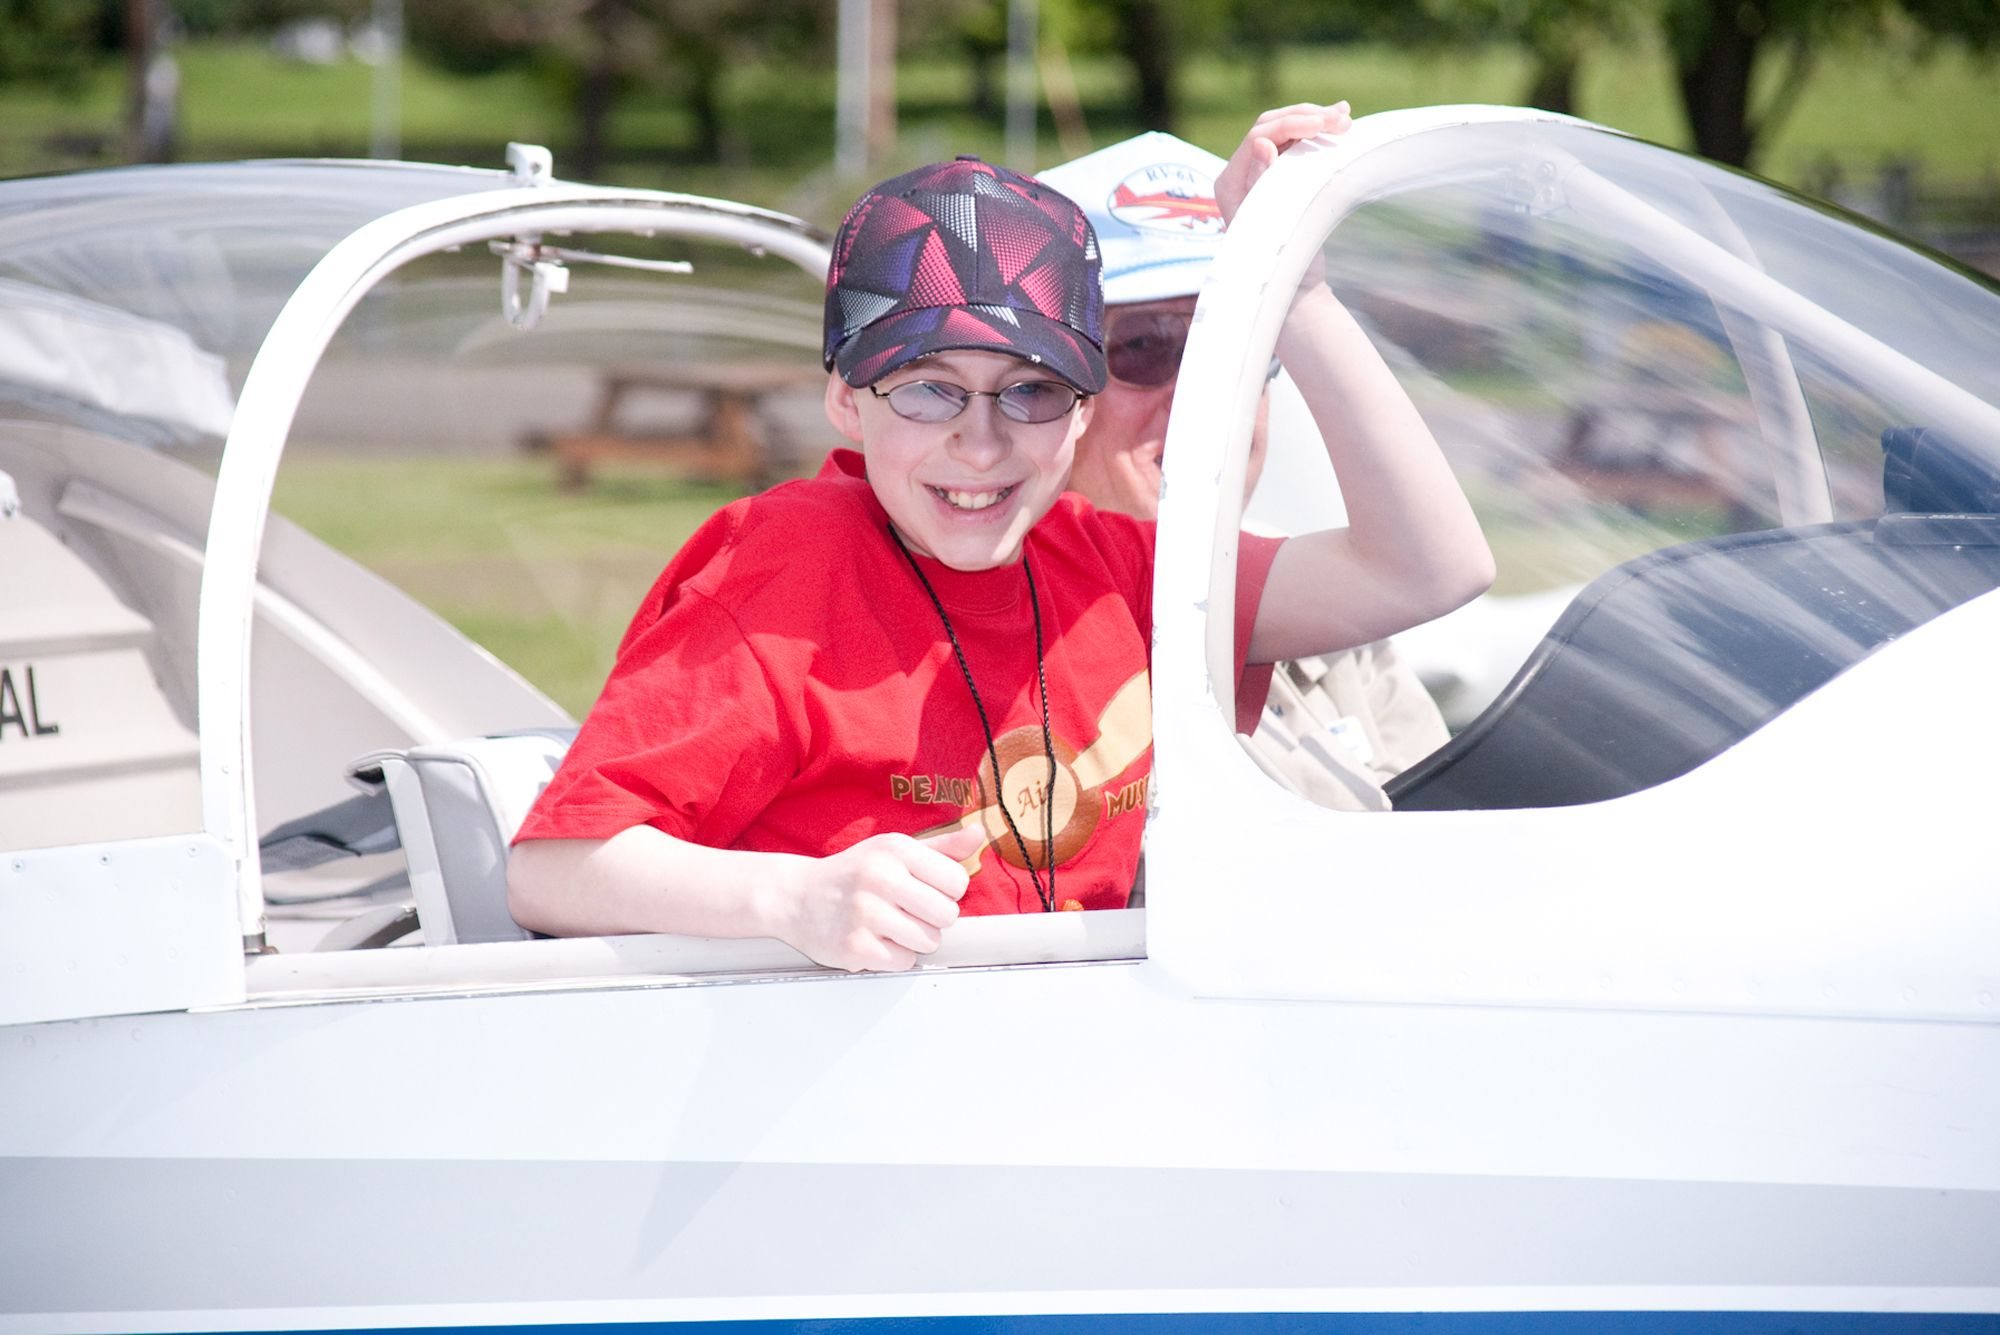 Kaya Galbraith, 13, was among the lucky students who received a free airplane ride during Pearson Air Museum's Open Cockpit Day.